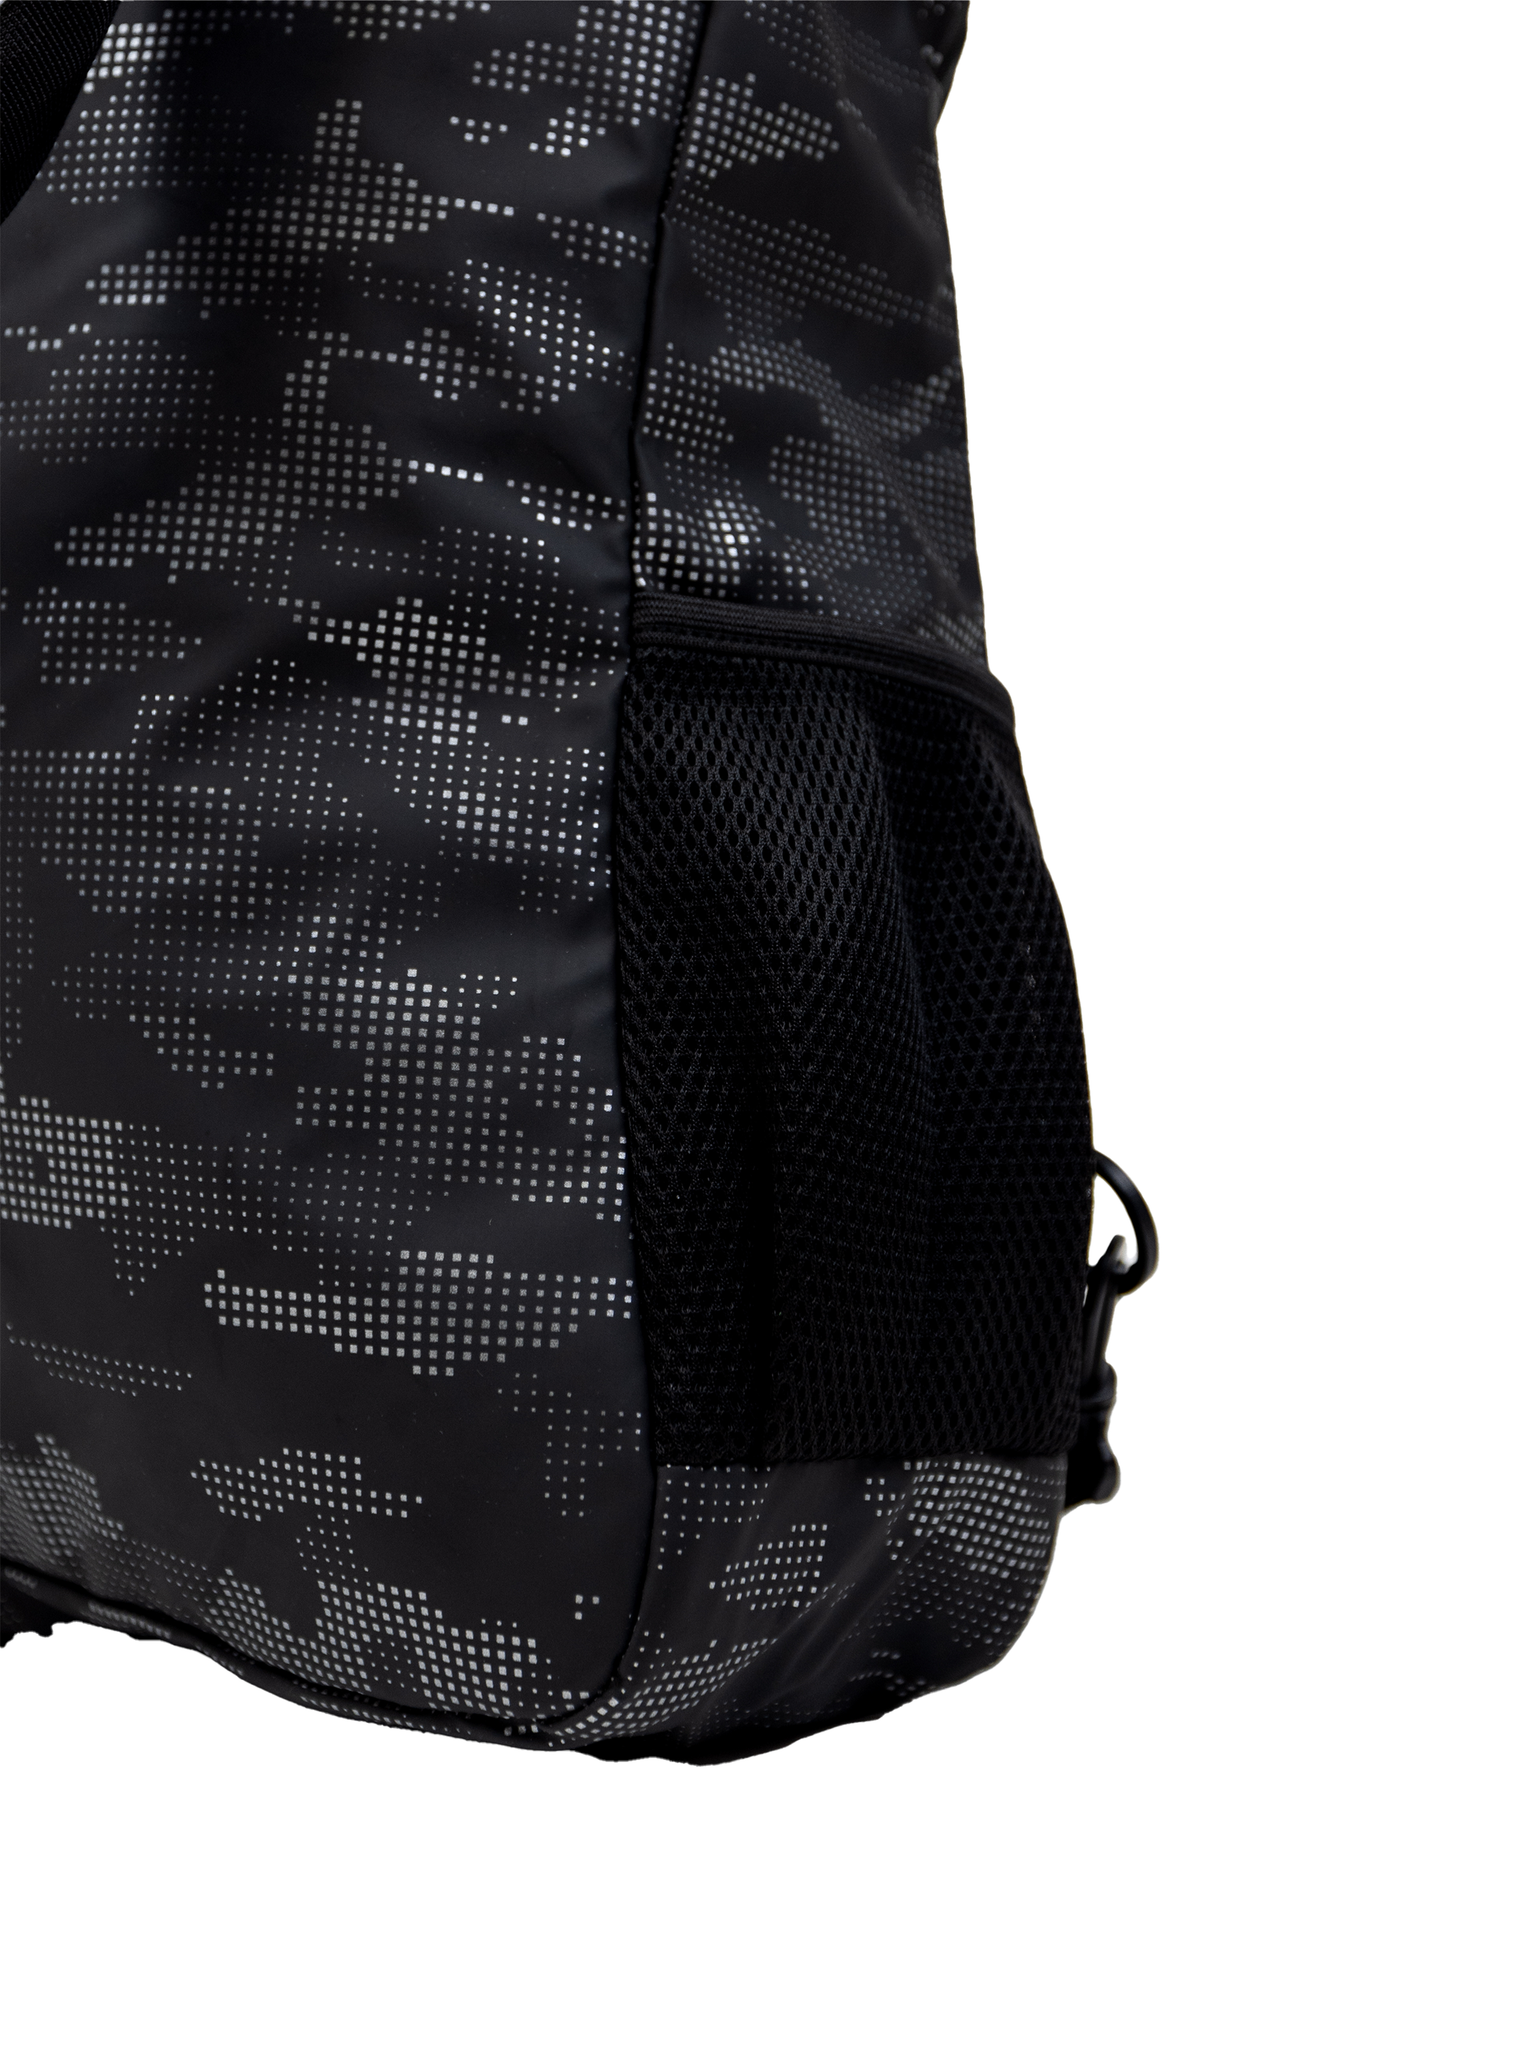 Takedown Backpack - Black Carbon Camo